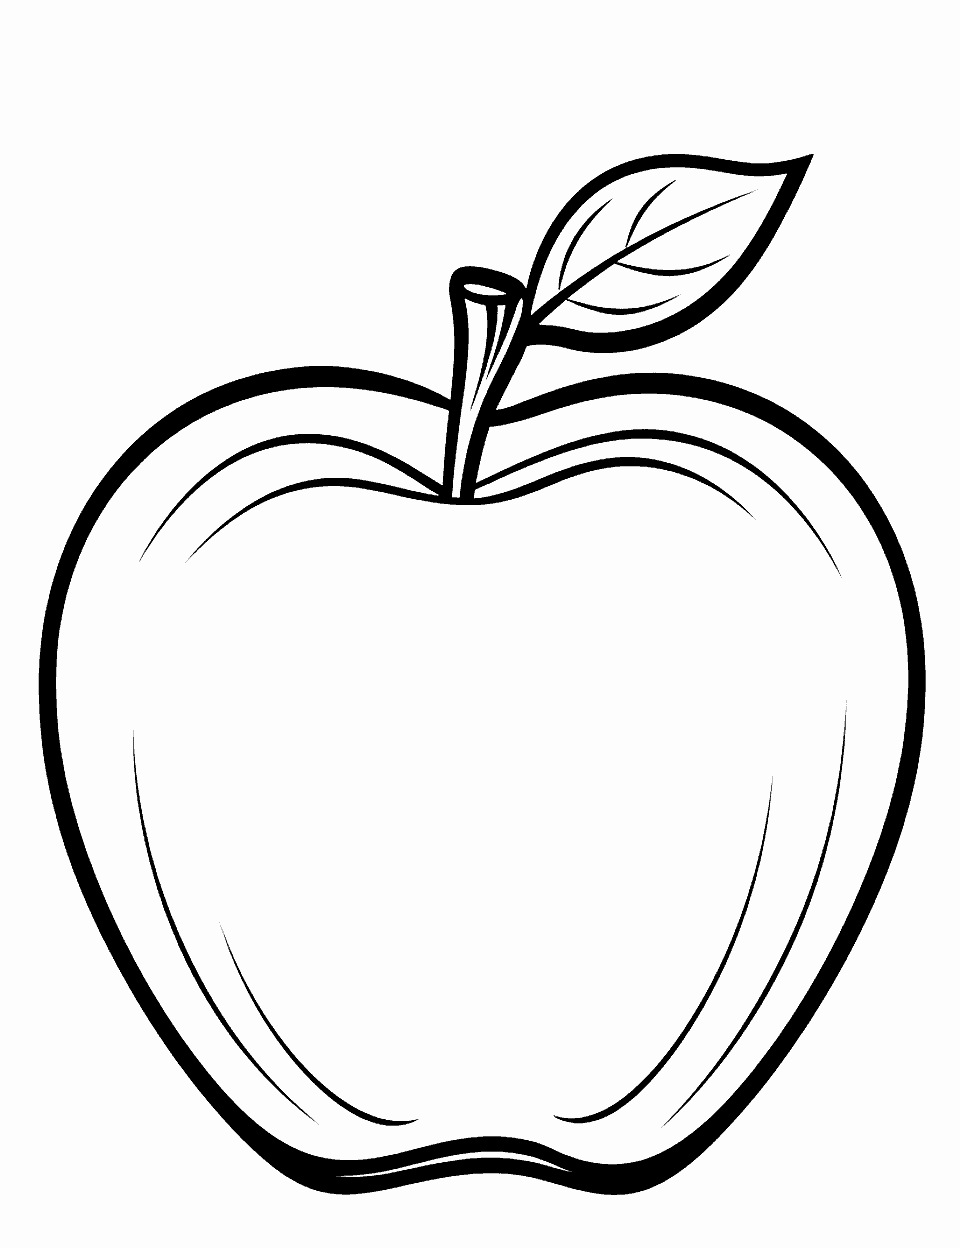 Simple Apple Outline Coloring Page - A basic outline of an apple, perfect for young children to color.